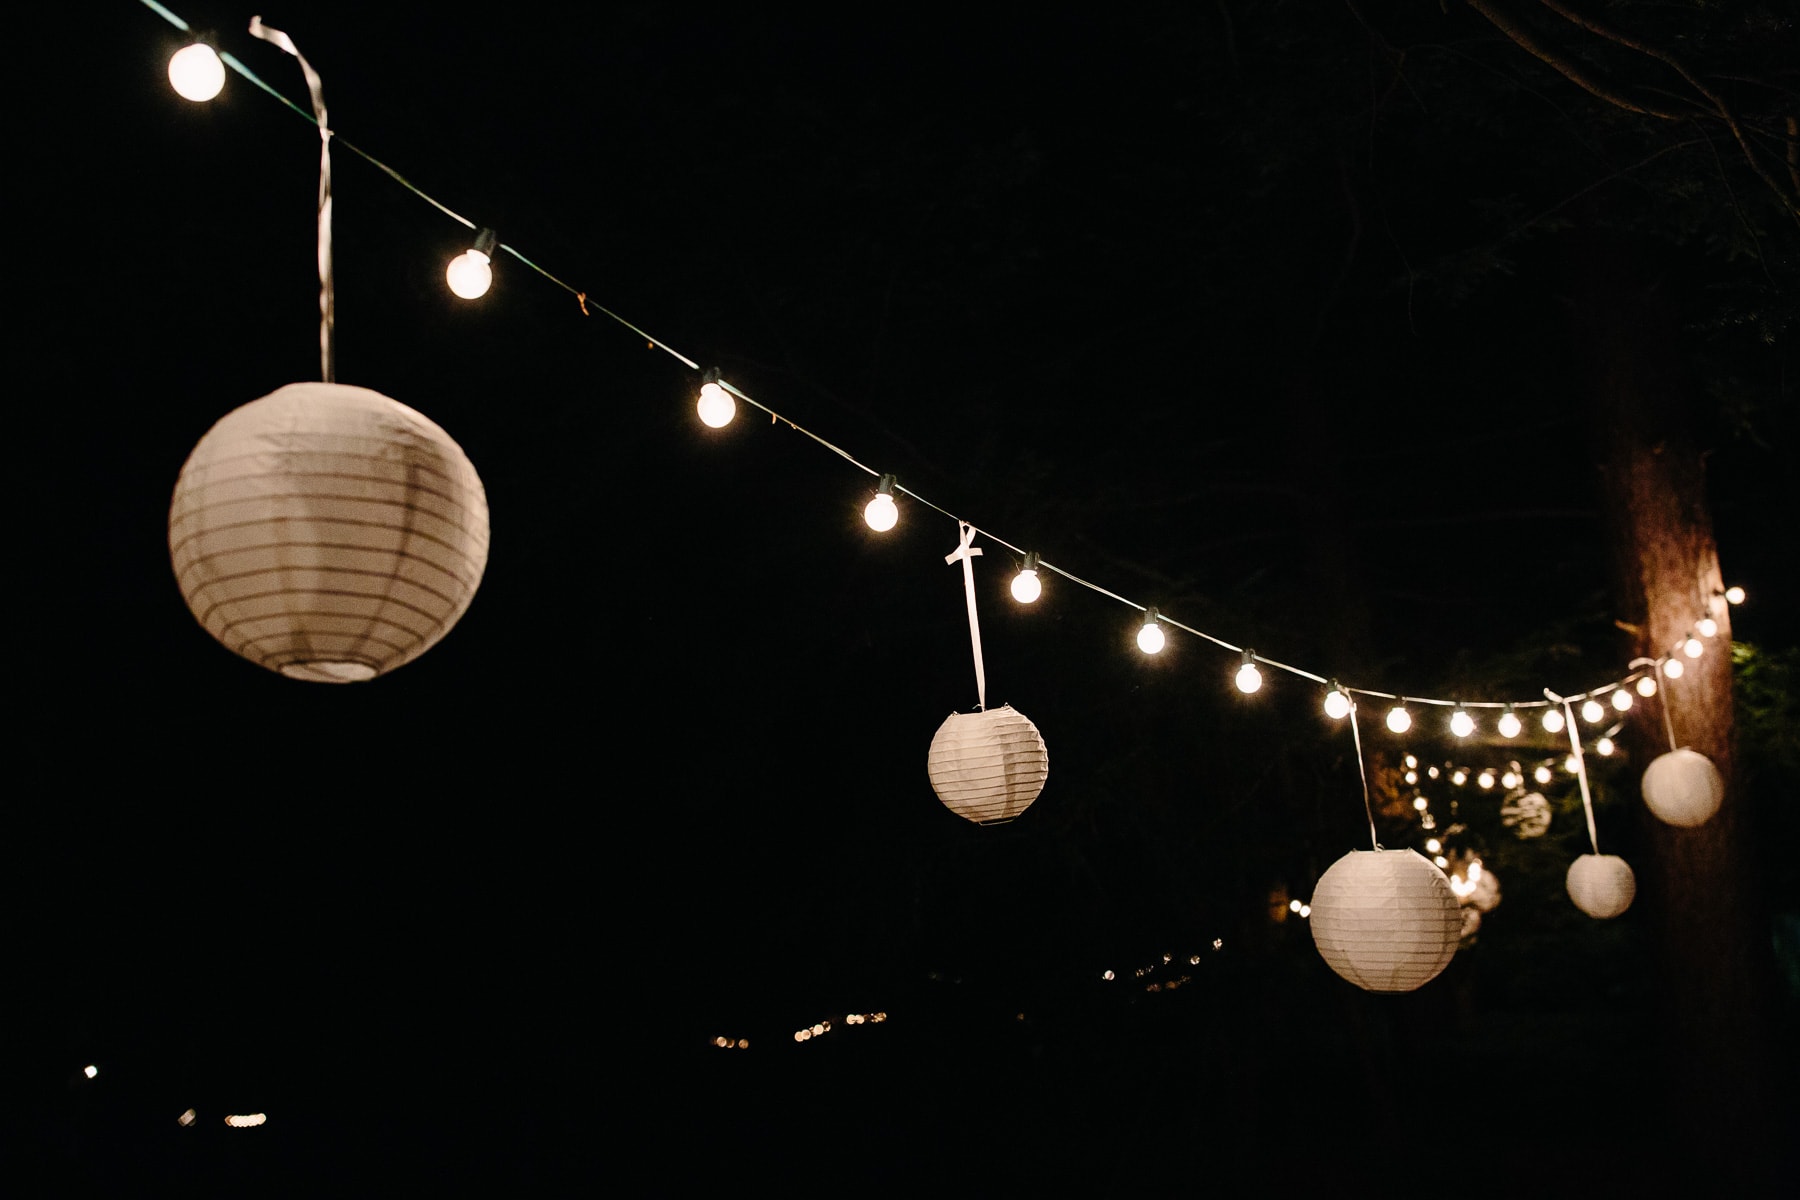 detail of bistro lights and paper lanterns | Kelly Benvenuto Photography